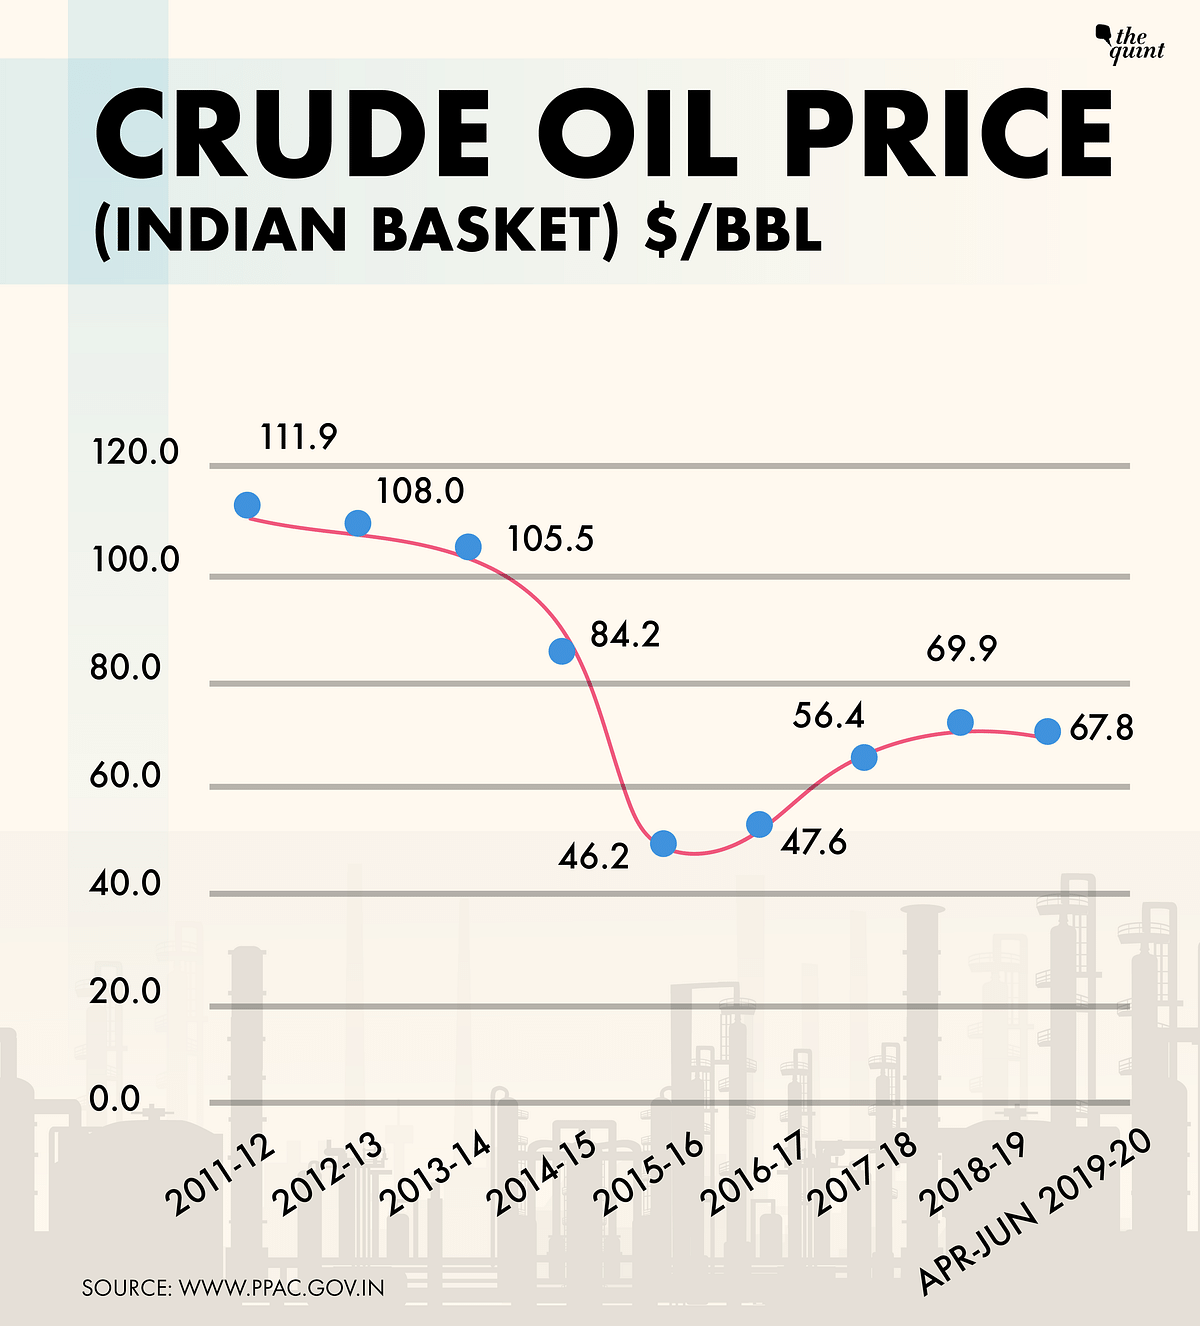 Lady luck keeps smiling on Modi, and crude oil prices come to the rescue again, writes Amitabh Tiwari. 